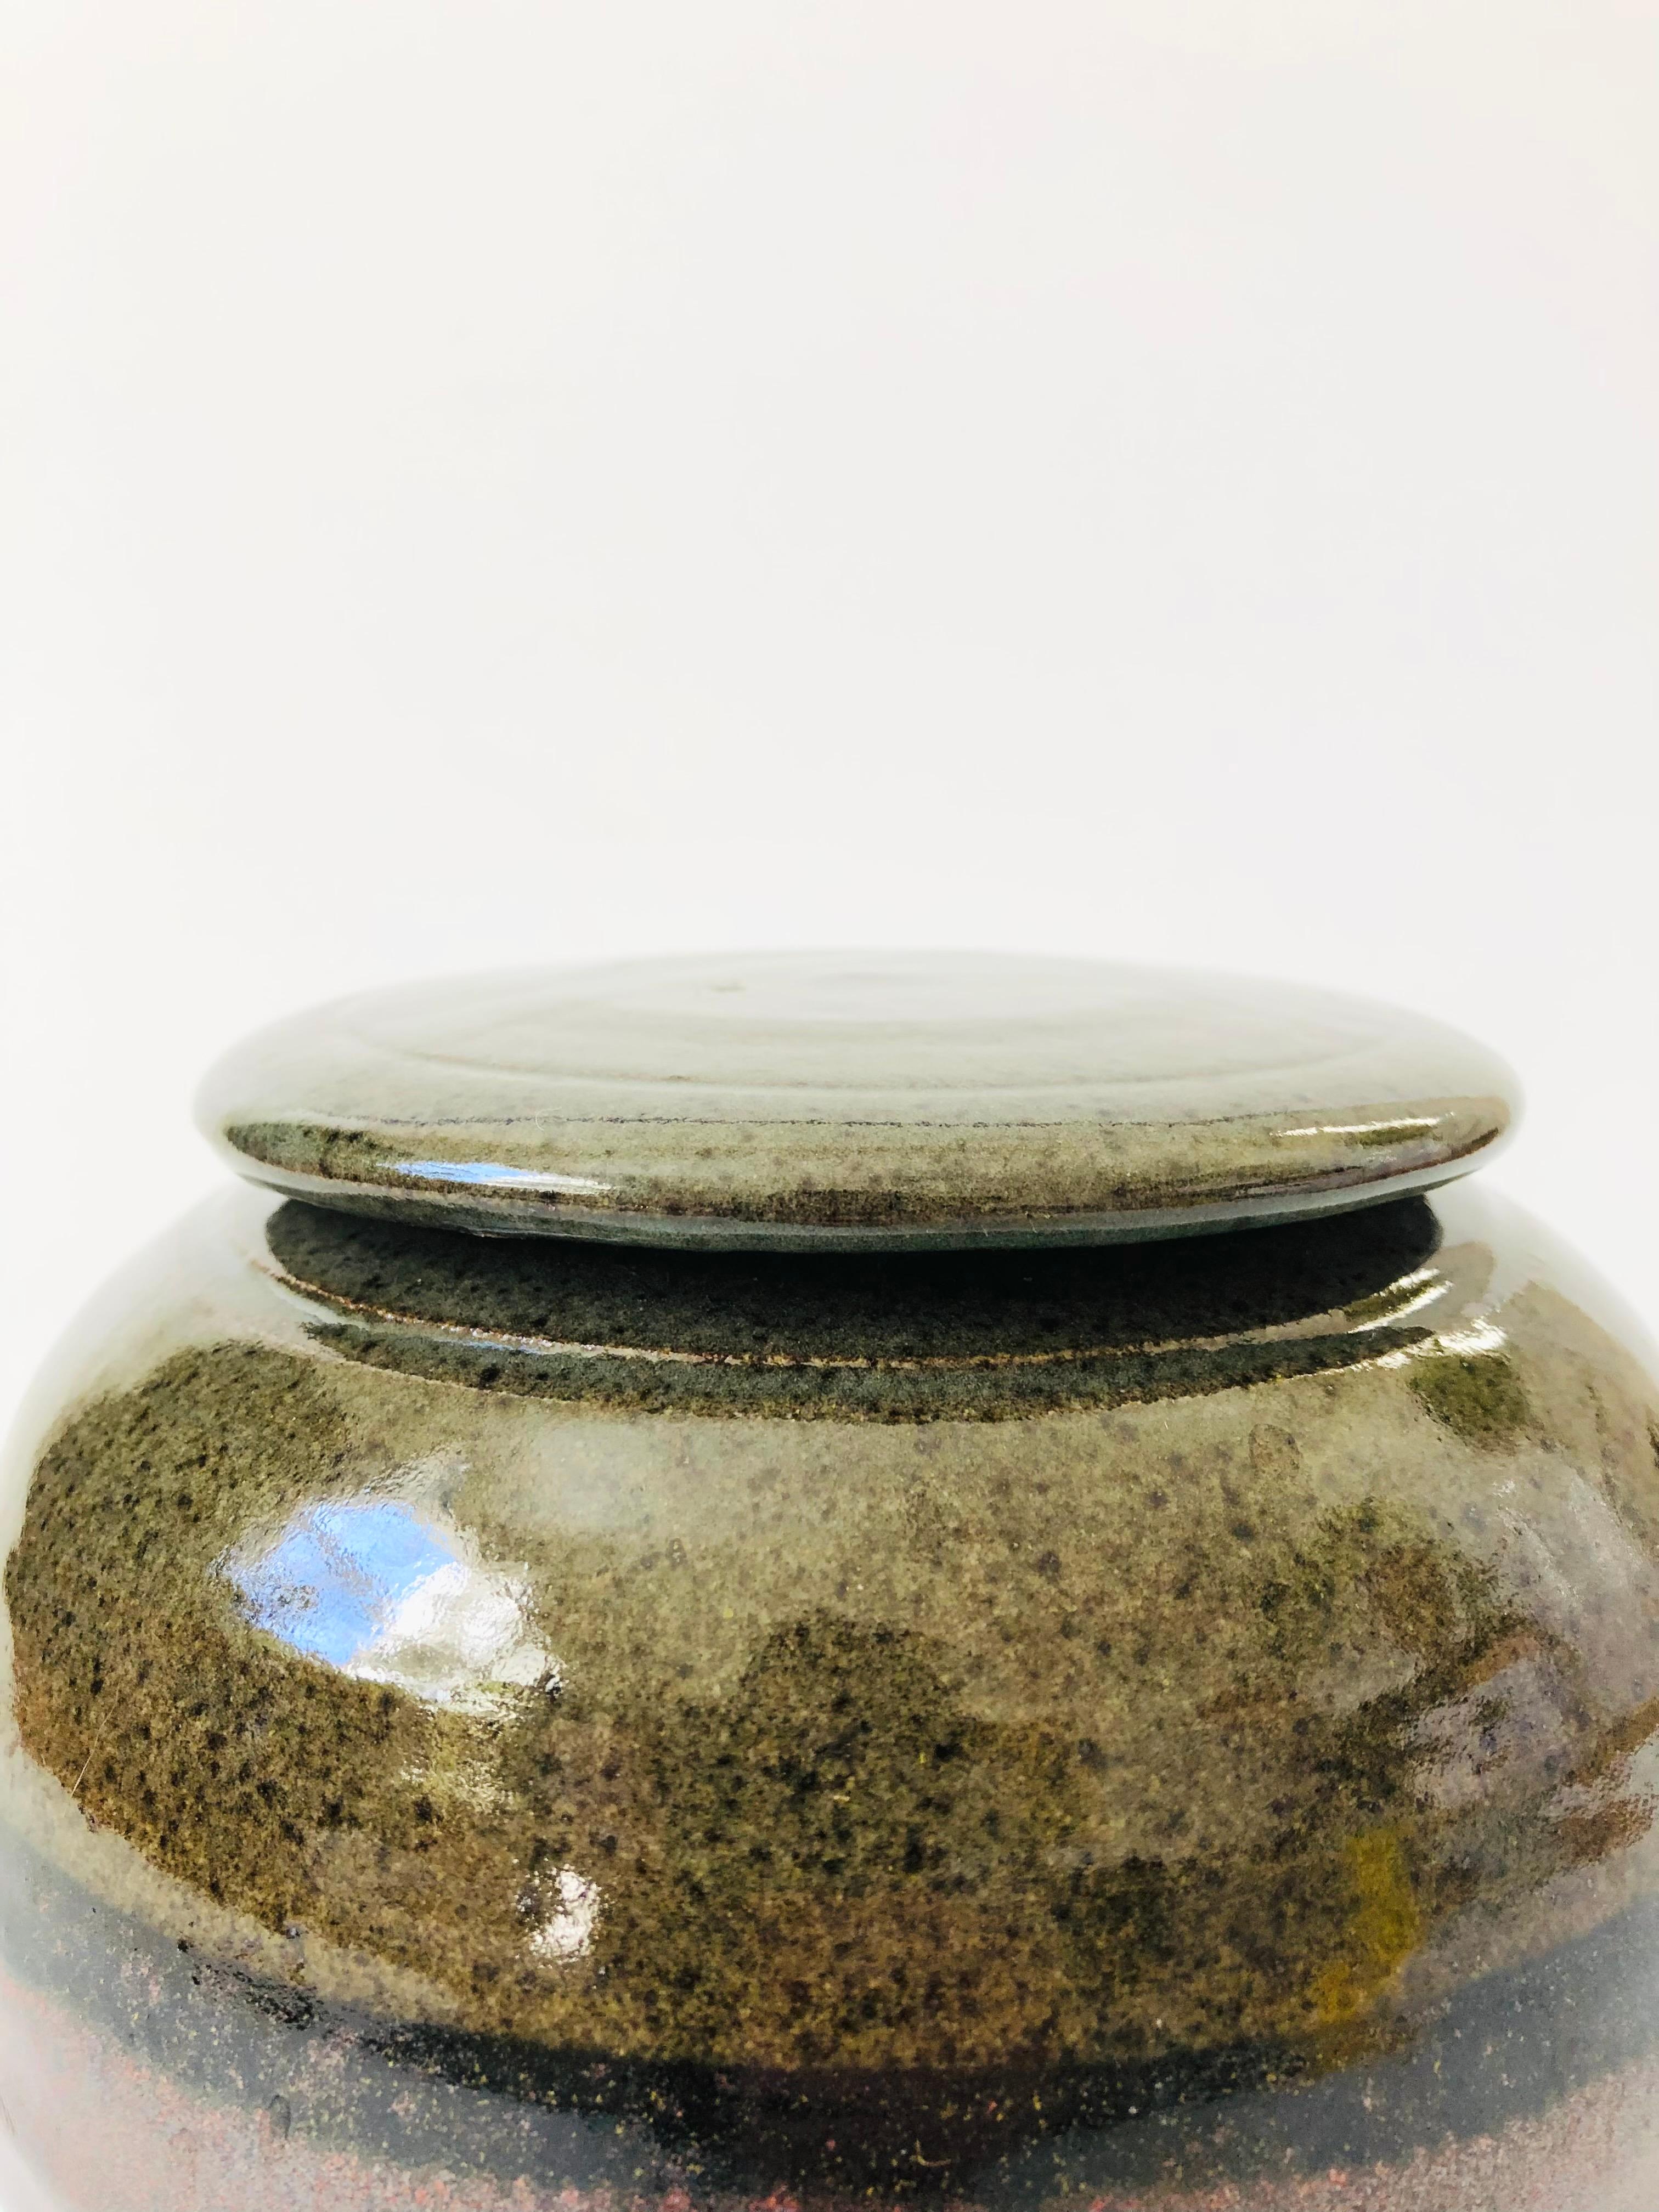 A vintage handmade studio pottery lidded container. Finished in two toned earthy glazes. Nice sphere shape in a versatile medium size, perfect for using for kitchen storage. Signed on the base.

